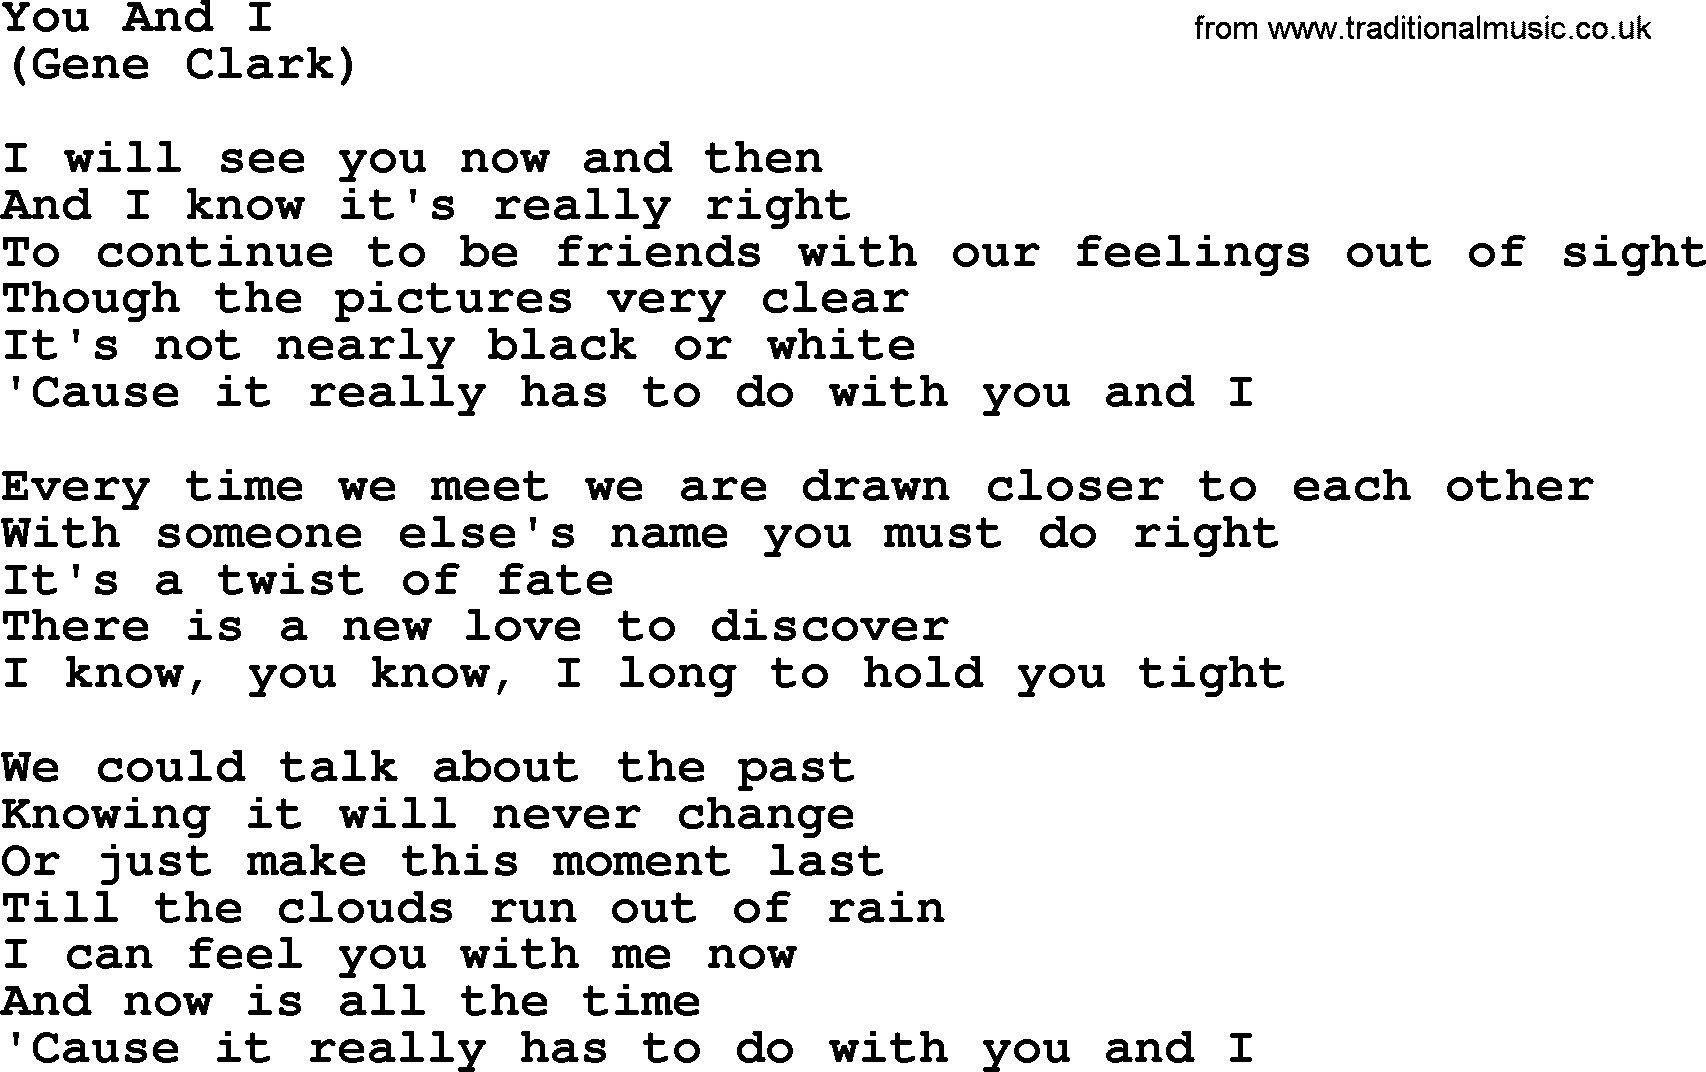 The Byrds song You And I, lyrics